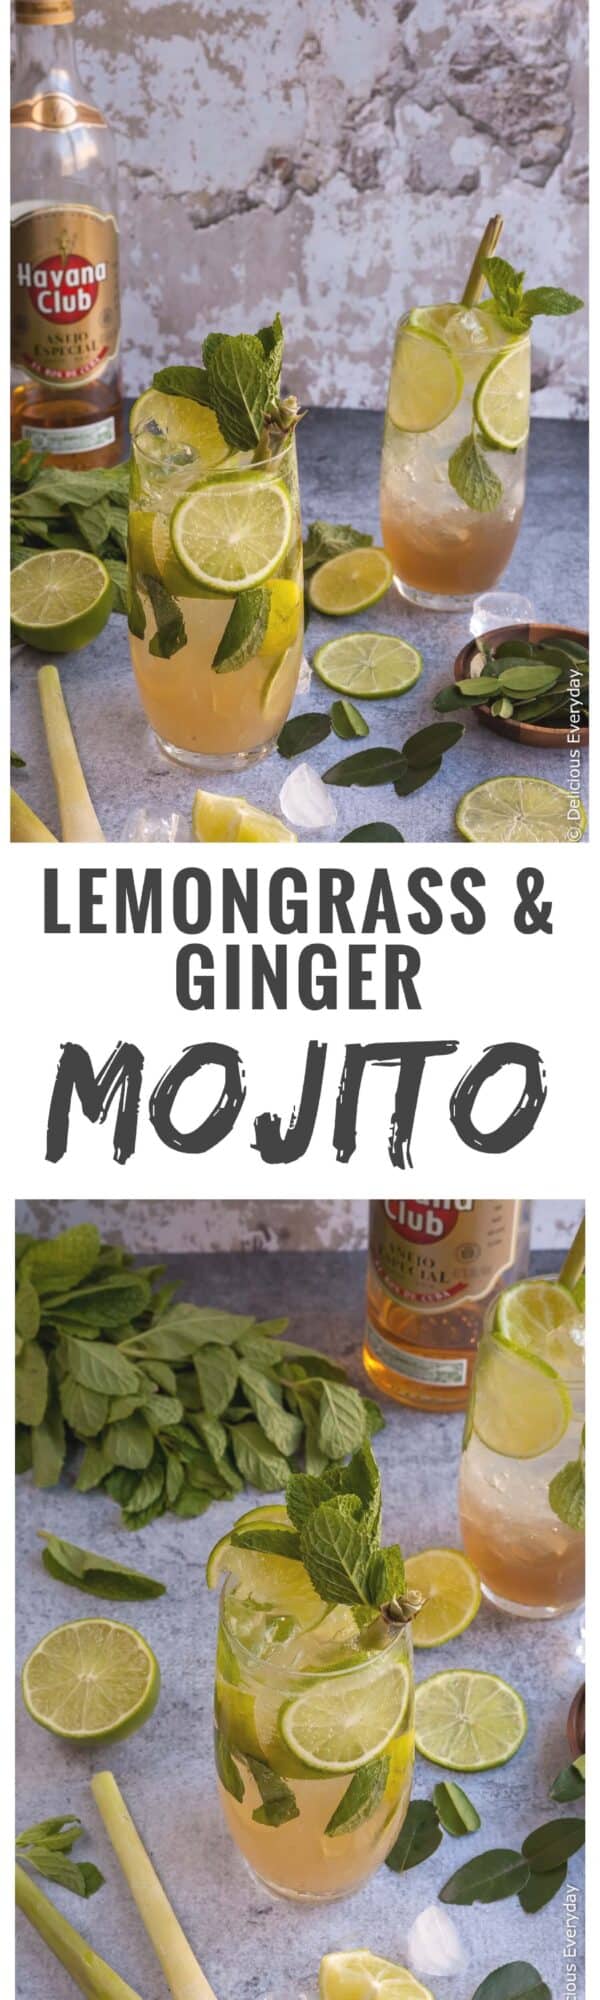 This Lemongrass, Kaffir Lime and Ginger Mojito is a beautiful update to the classic. Ginger adds a punchy kick while the lemongrass and kaffir lime add a lovely fragrant depth of flavour.